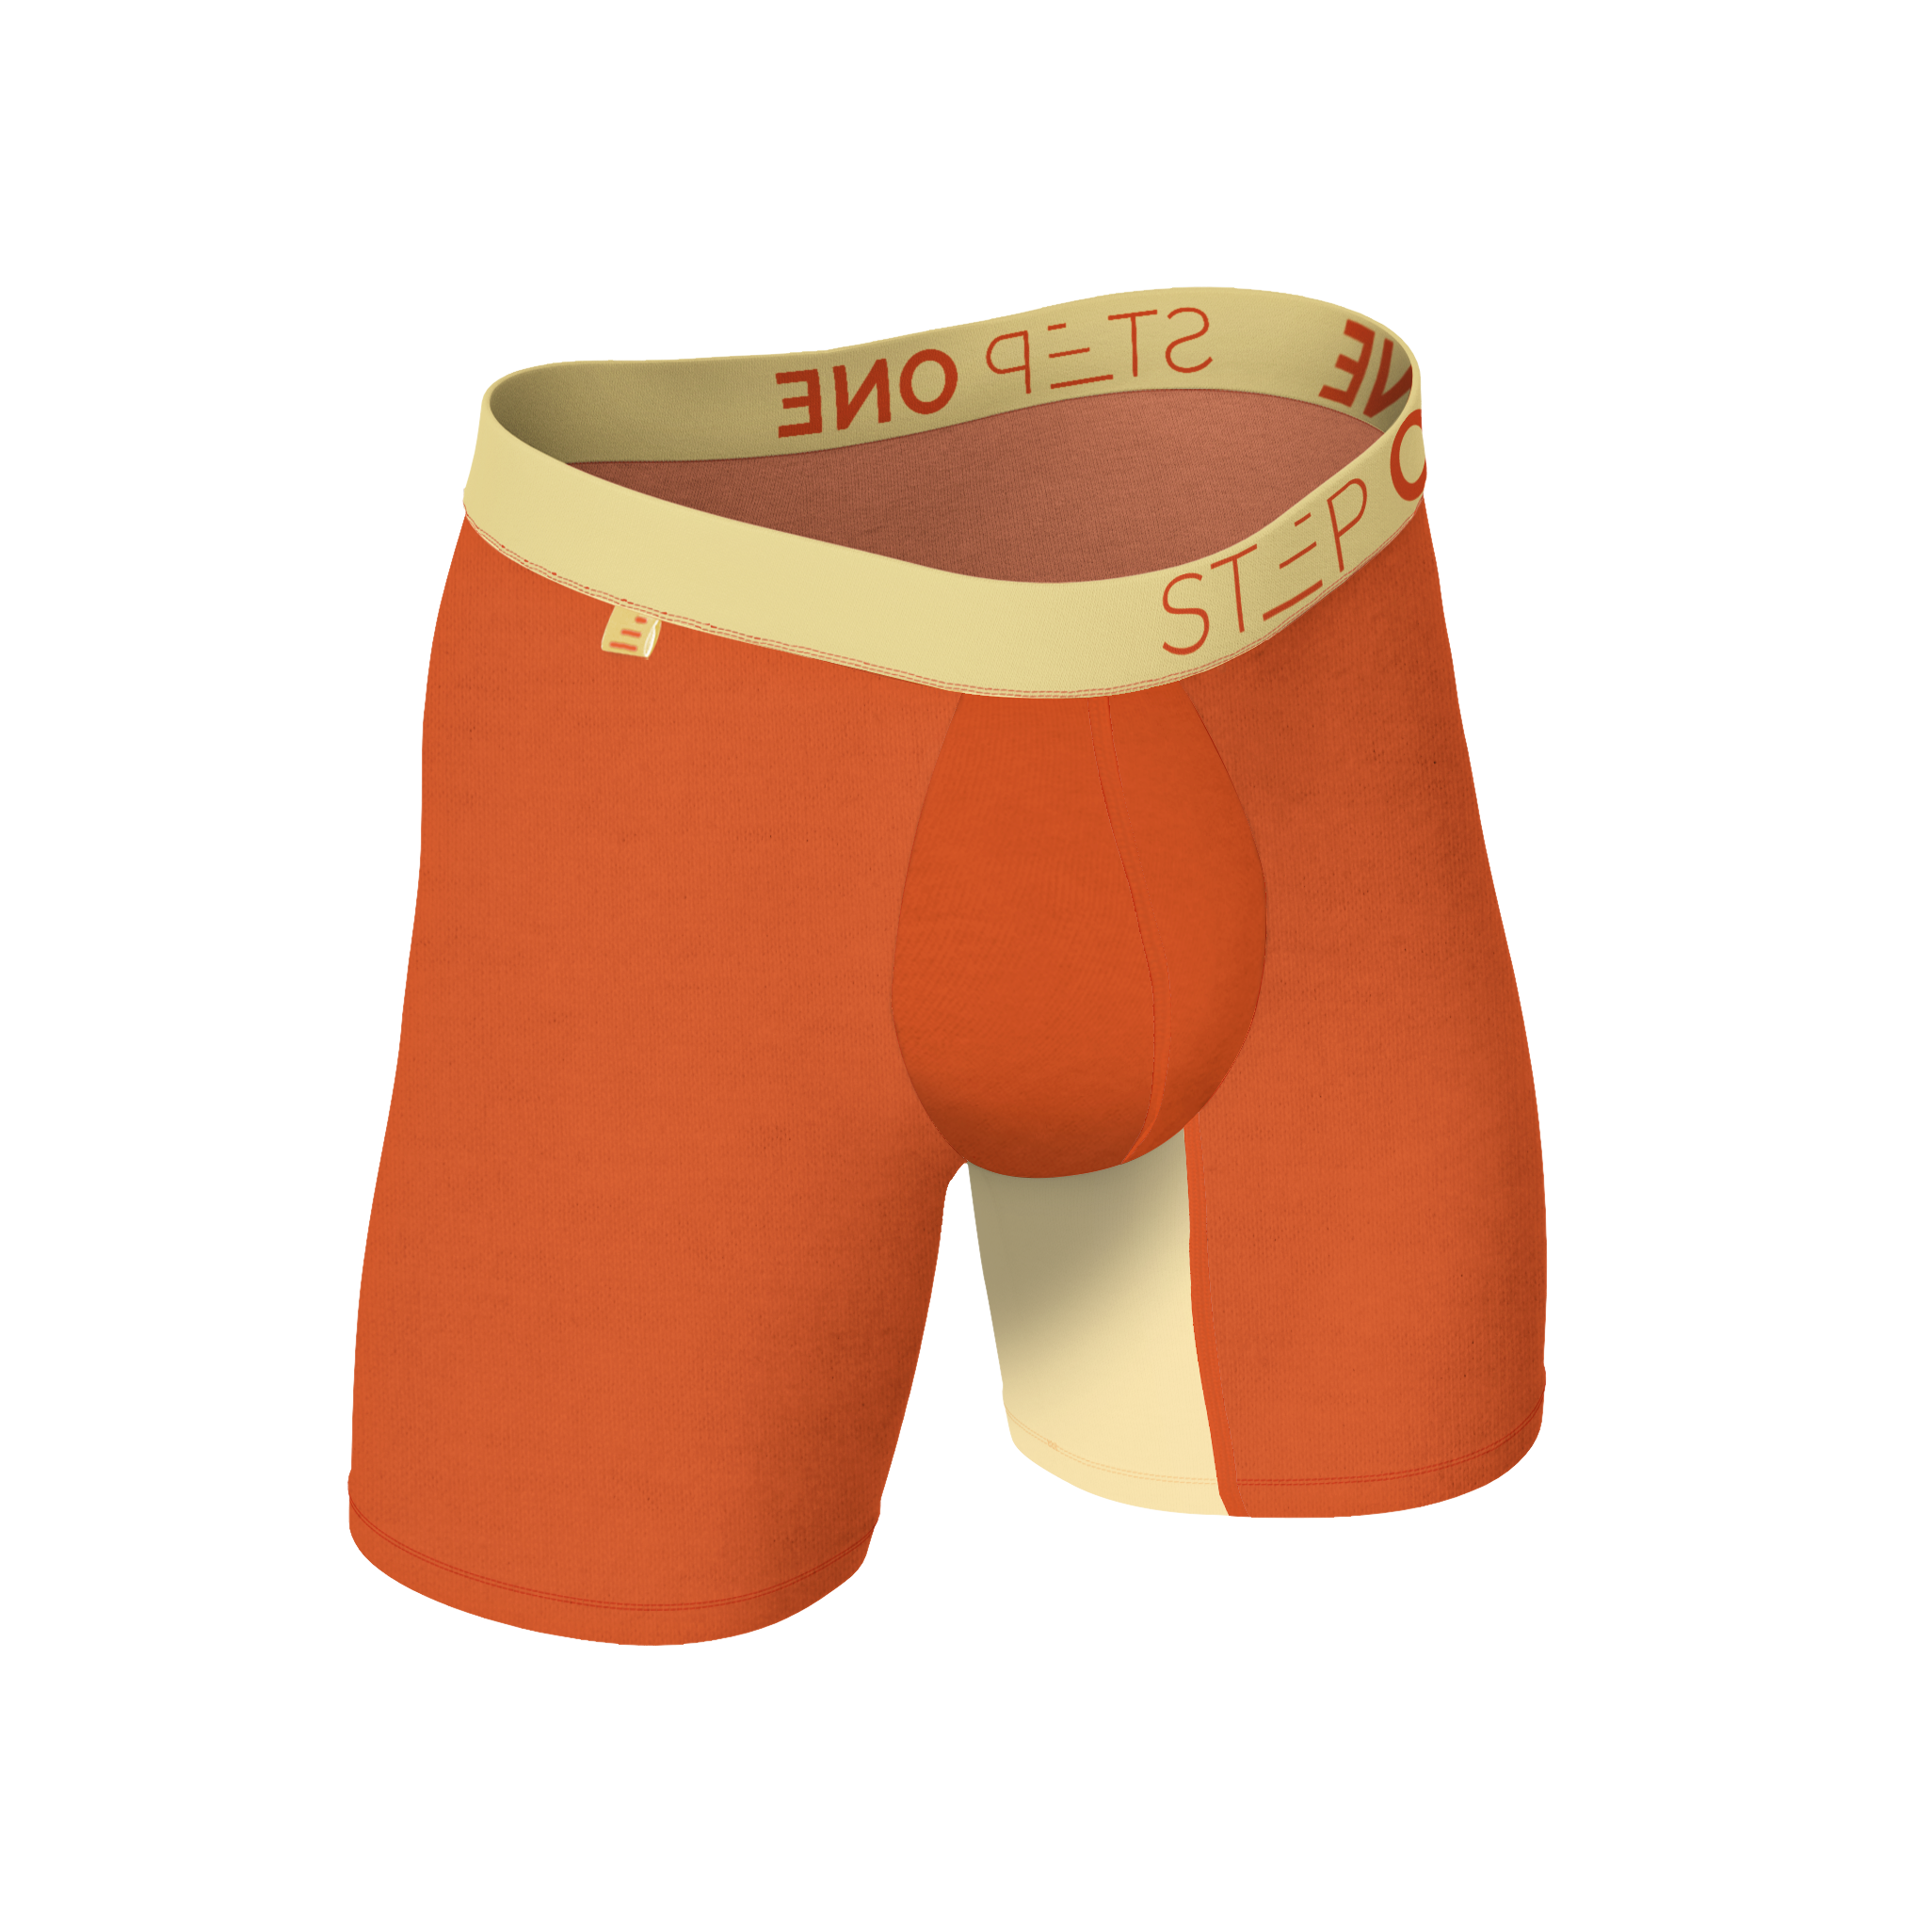 Boxer Brief - Donald Trunks - View 3